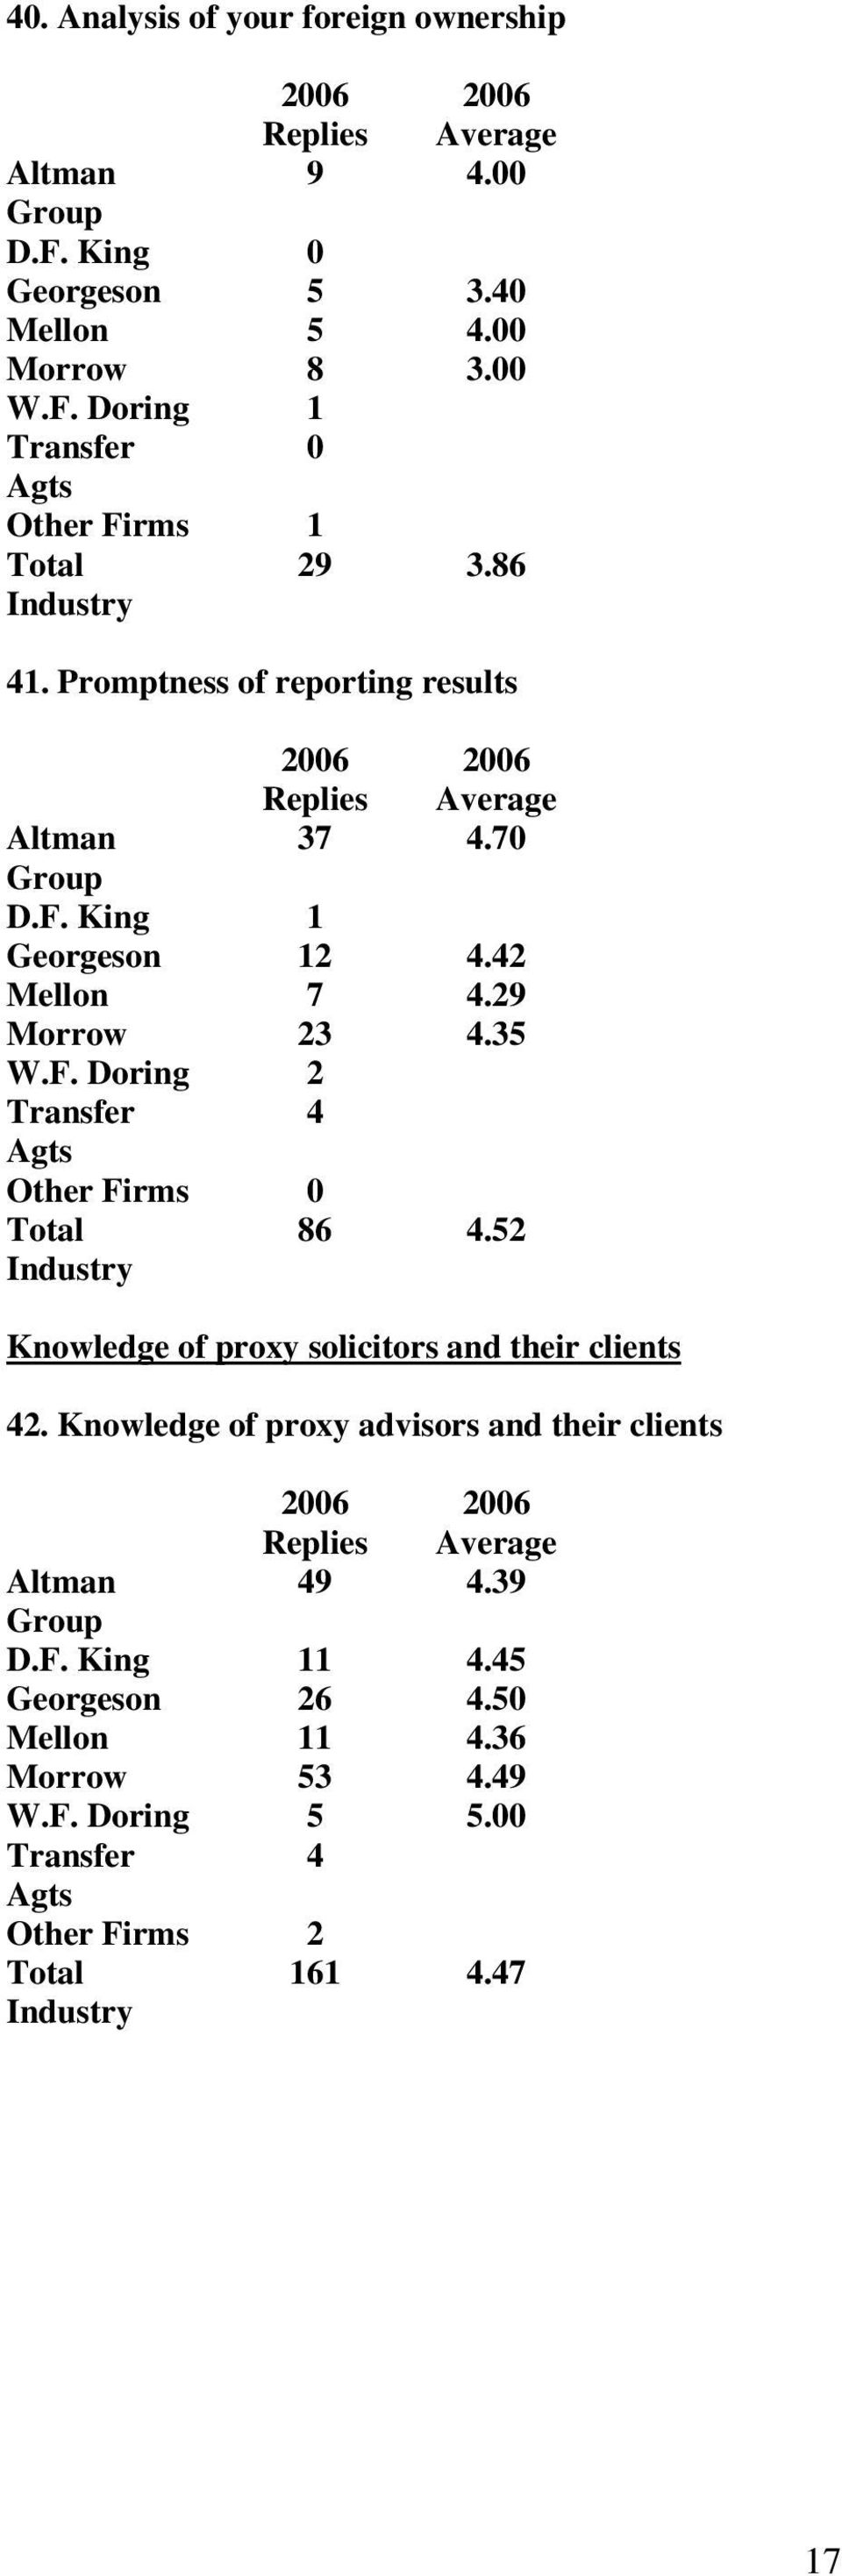 5 Knowledge of proxy solicitors and their clients 4. Knowledge of proxy advisors and their clients 49 4.39 D.F.